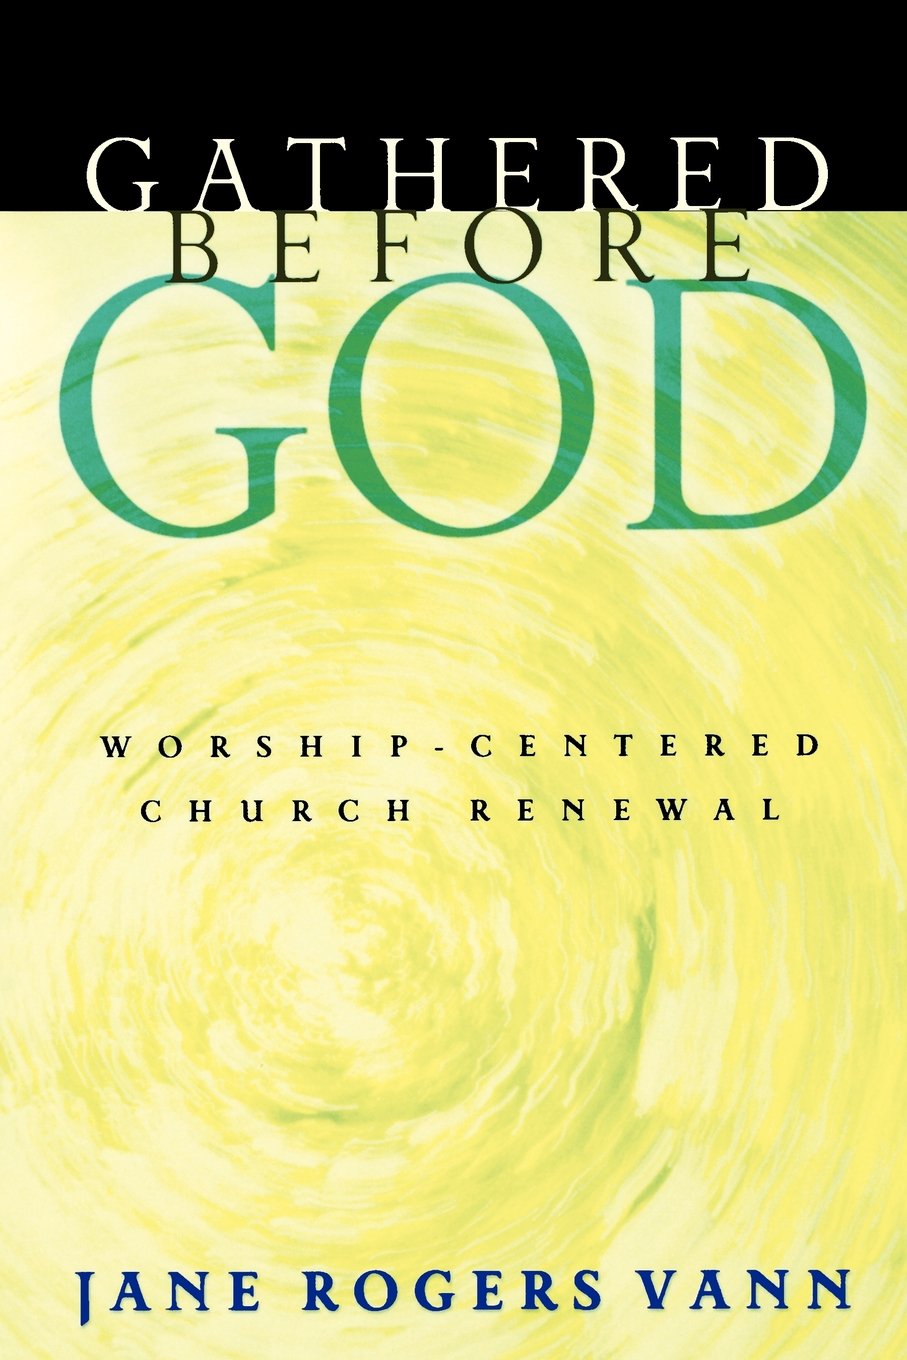 Cover of Gathered before God